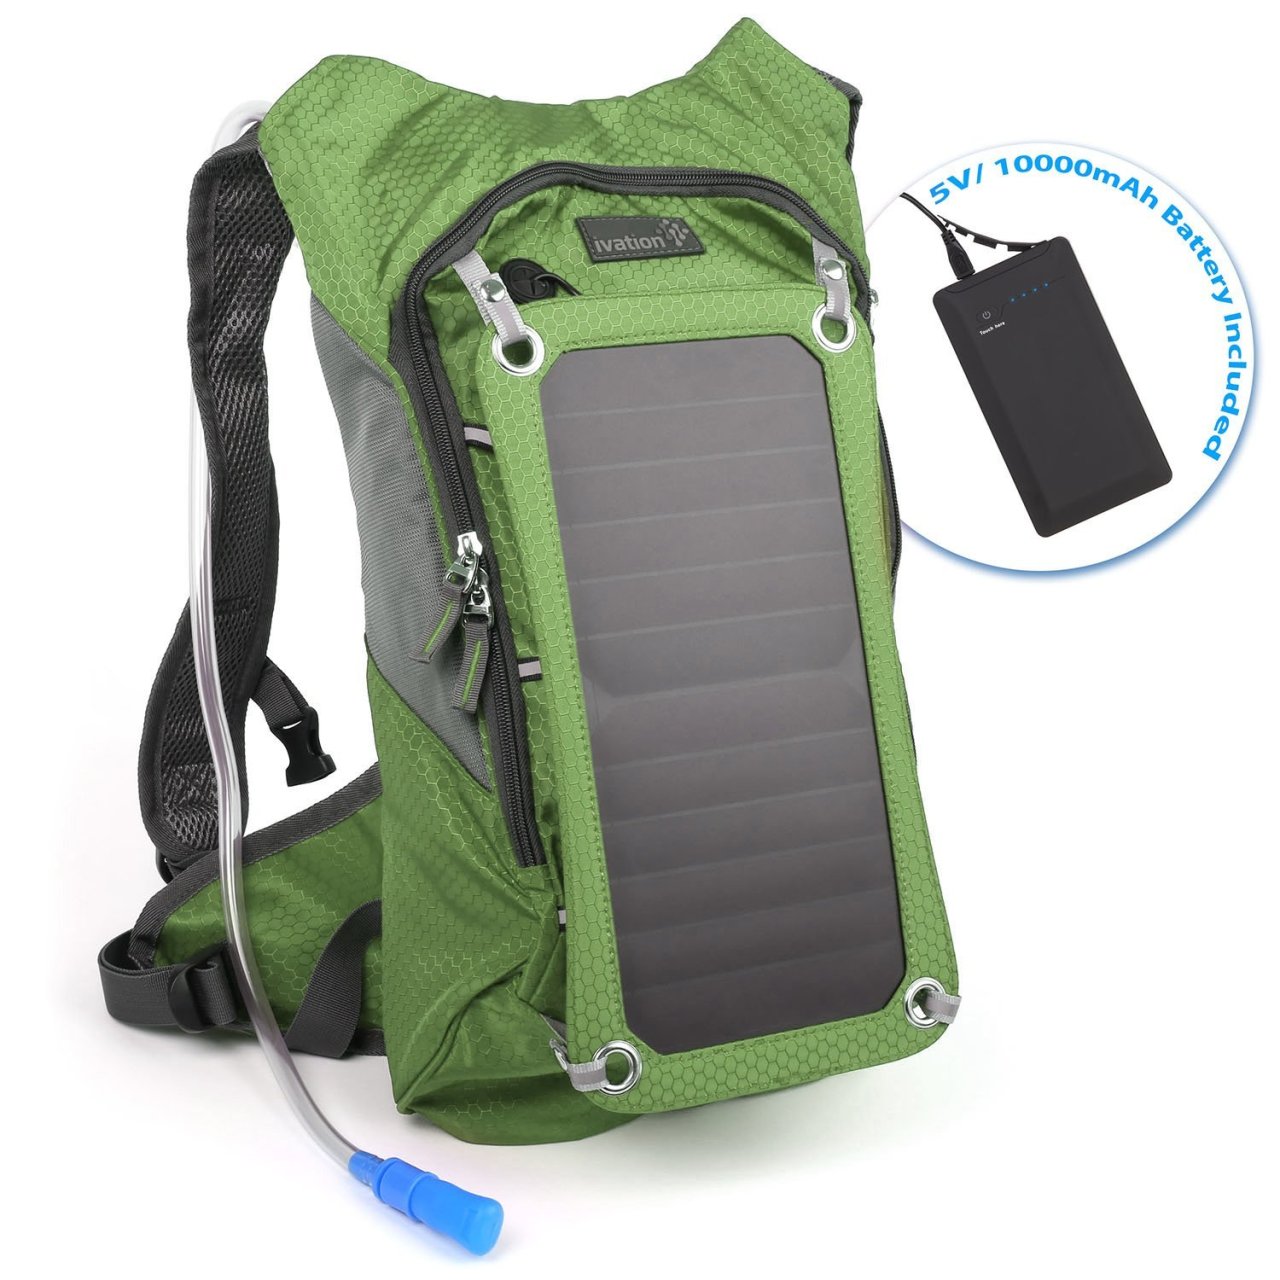 Eco-friendly electronics for hiking, camping and mountaineering 	Eco-friendly electronics for hiking
Hiking involves going out to the wild and getting to be in contact with the natural environment. Hiking and camping allow one to get in touch with...